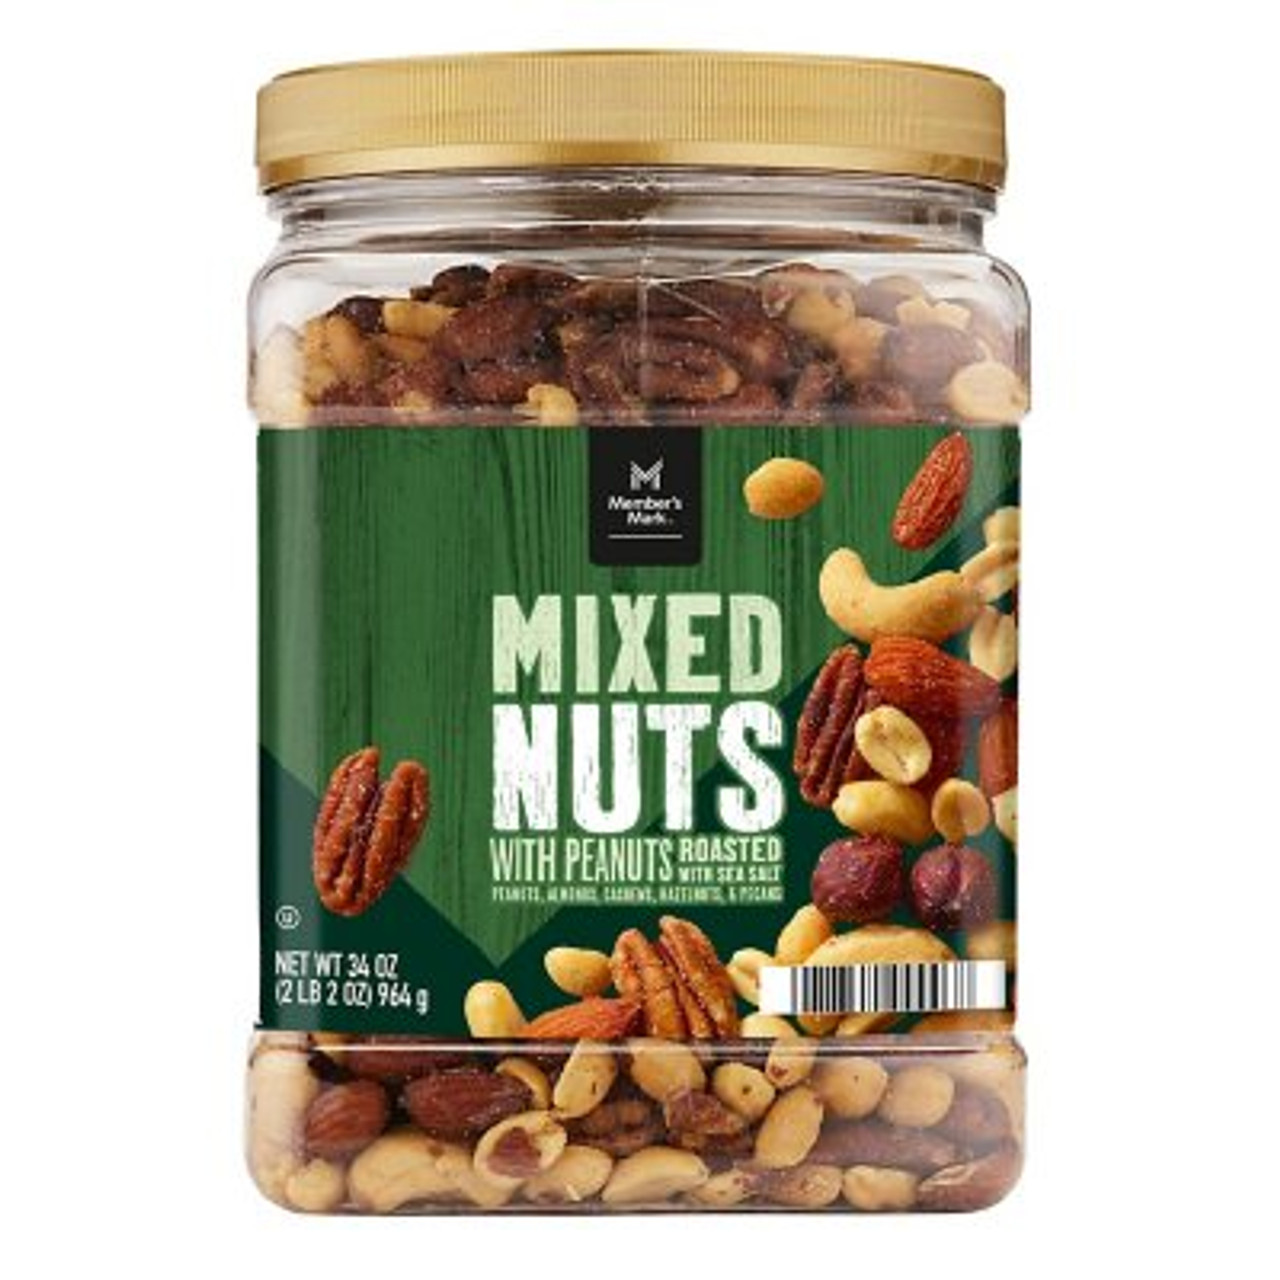 Member's Mark Roasted and Salted Mixed Nuts with Peanuts (34 oz.) - [From 49.00 - Choose pk Qty ] - *Ships from Miami